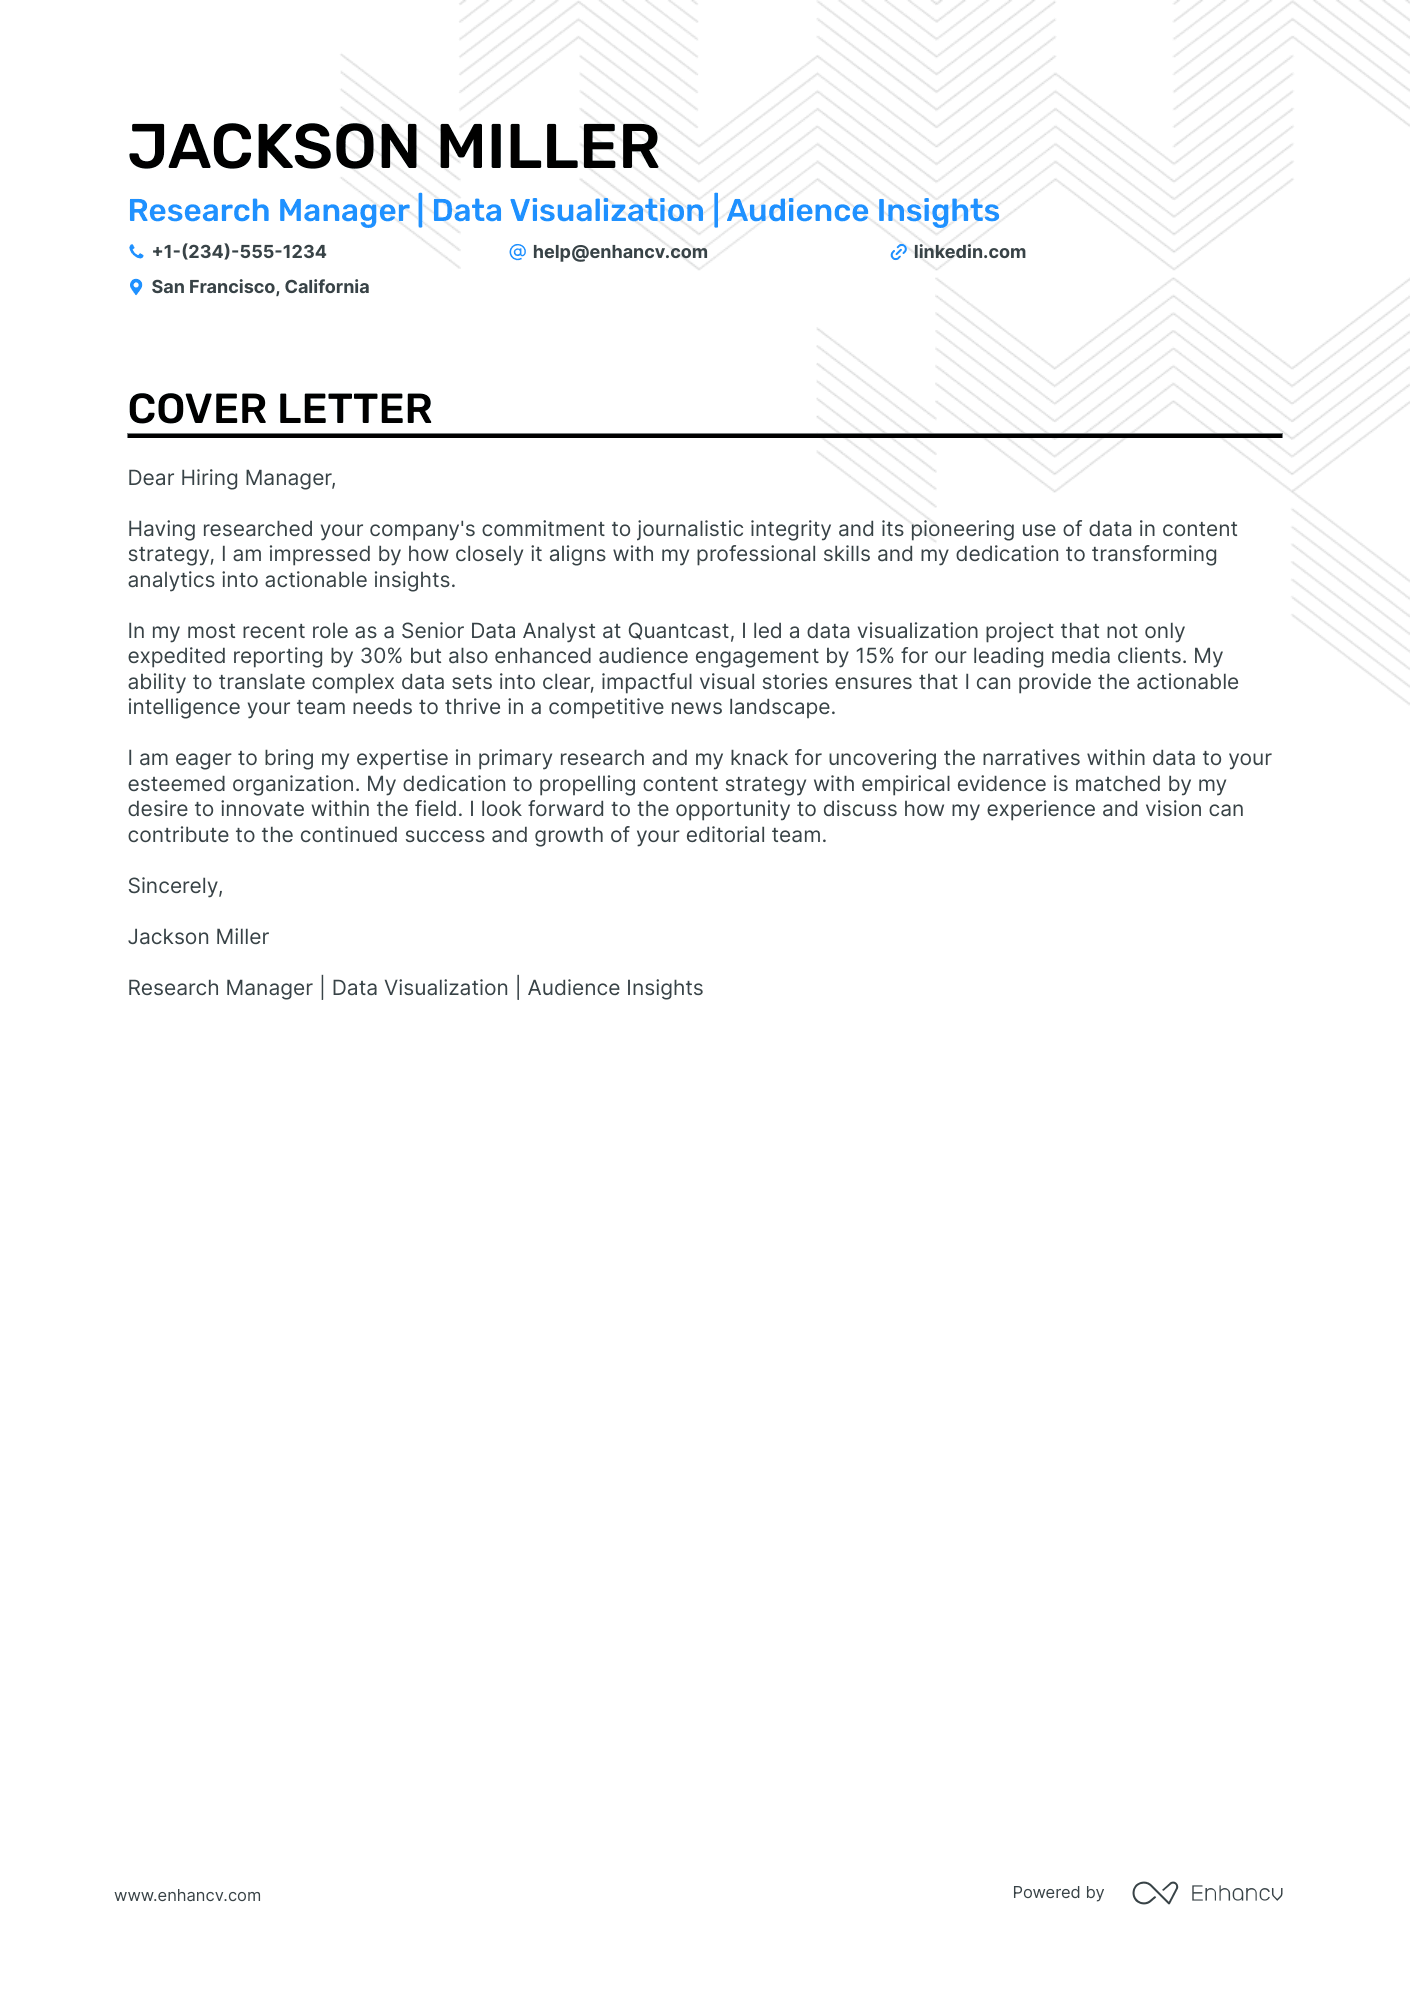 covering letter for research assistant position